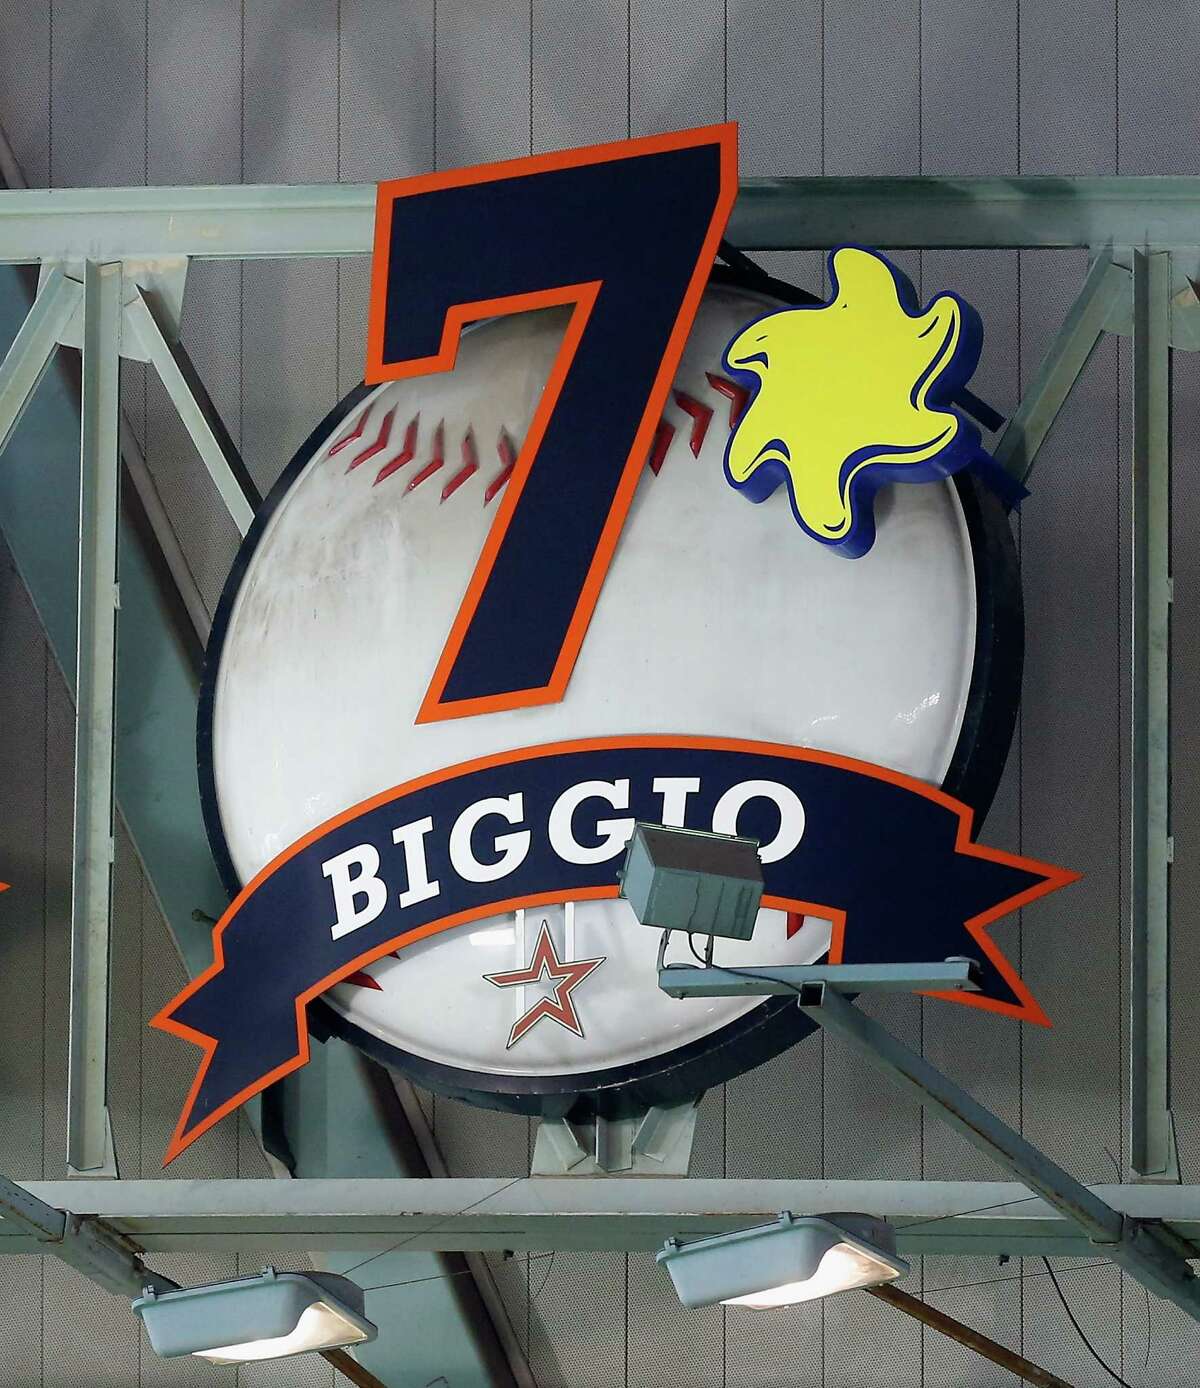 Attendance is up at Minute Maid Park thanks to a winning season and special giveaways marking ﻿the induction of former Astro Craig Biggio into the Hall of Fame﻿.﻿